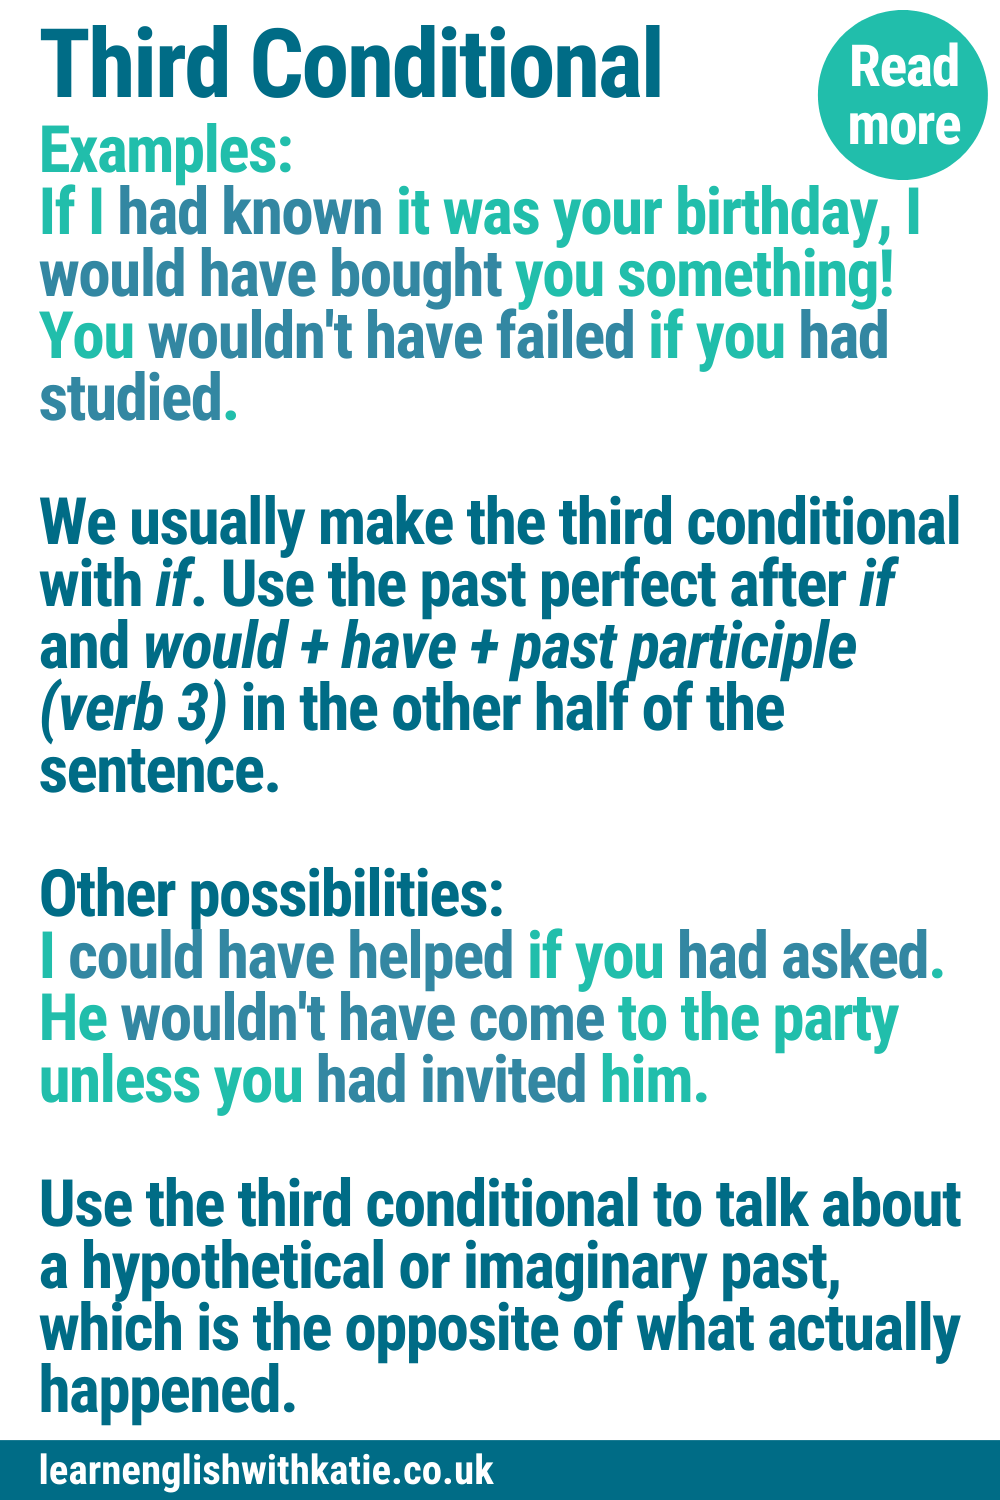 pinnable infographic summarising the third conditional